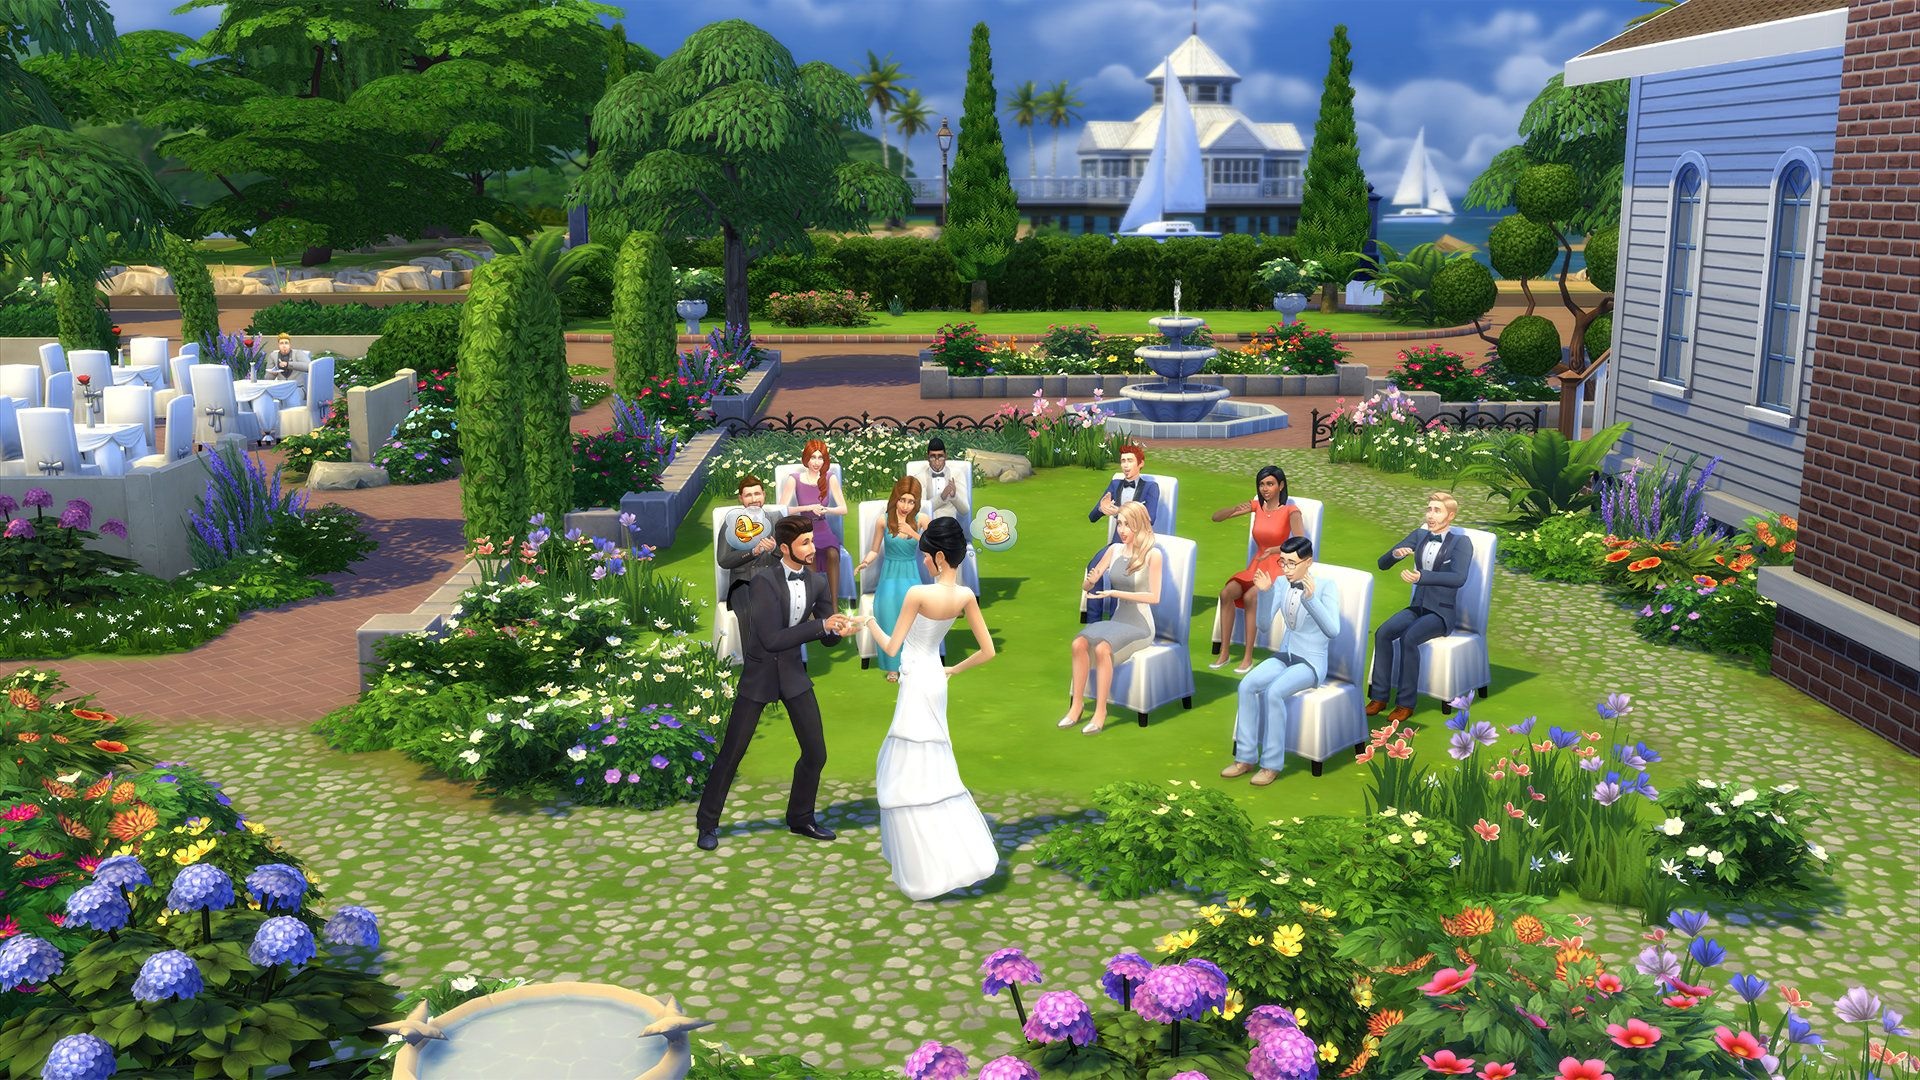 The Sims 4 screenshot showing Sims getting married.